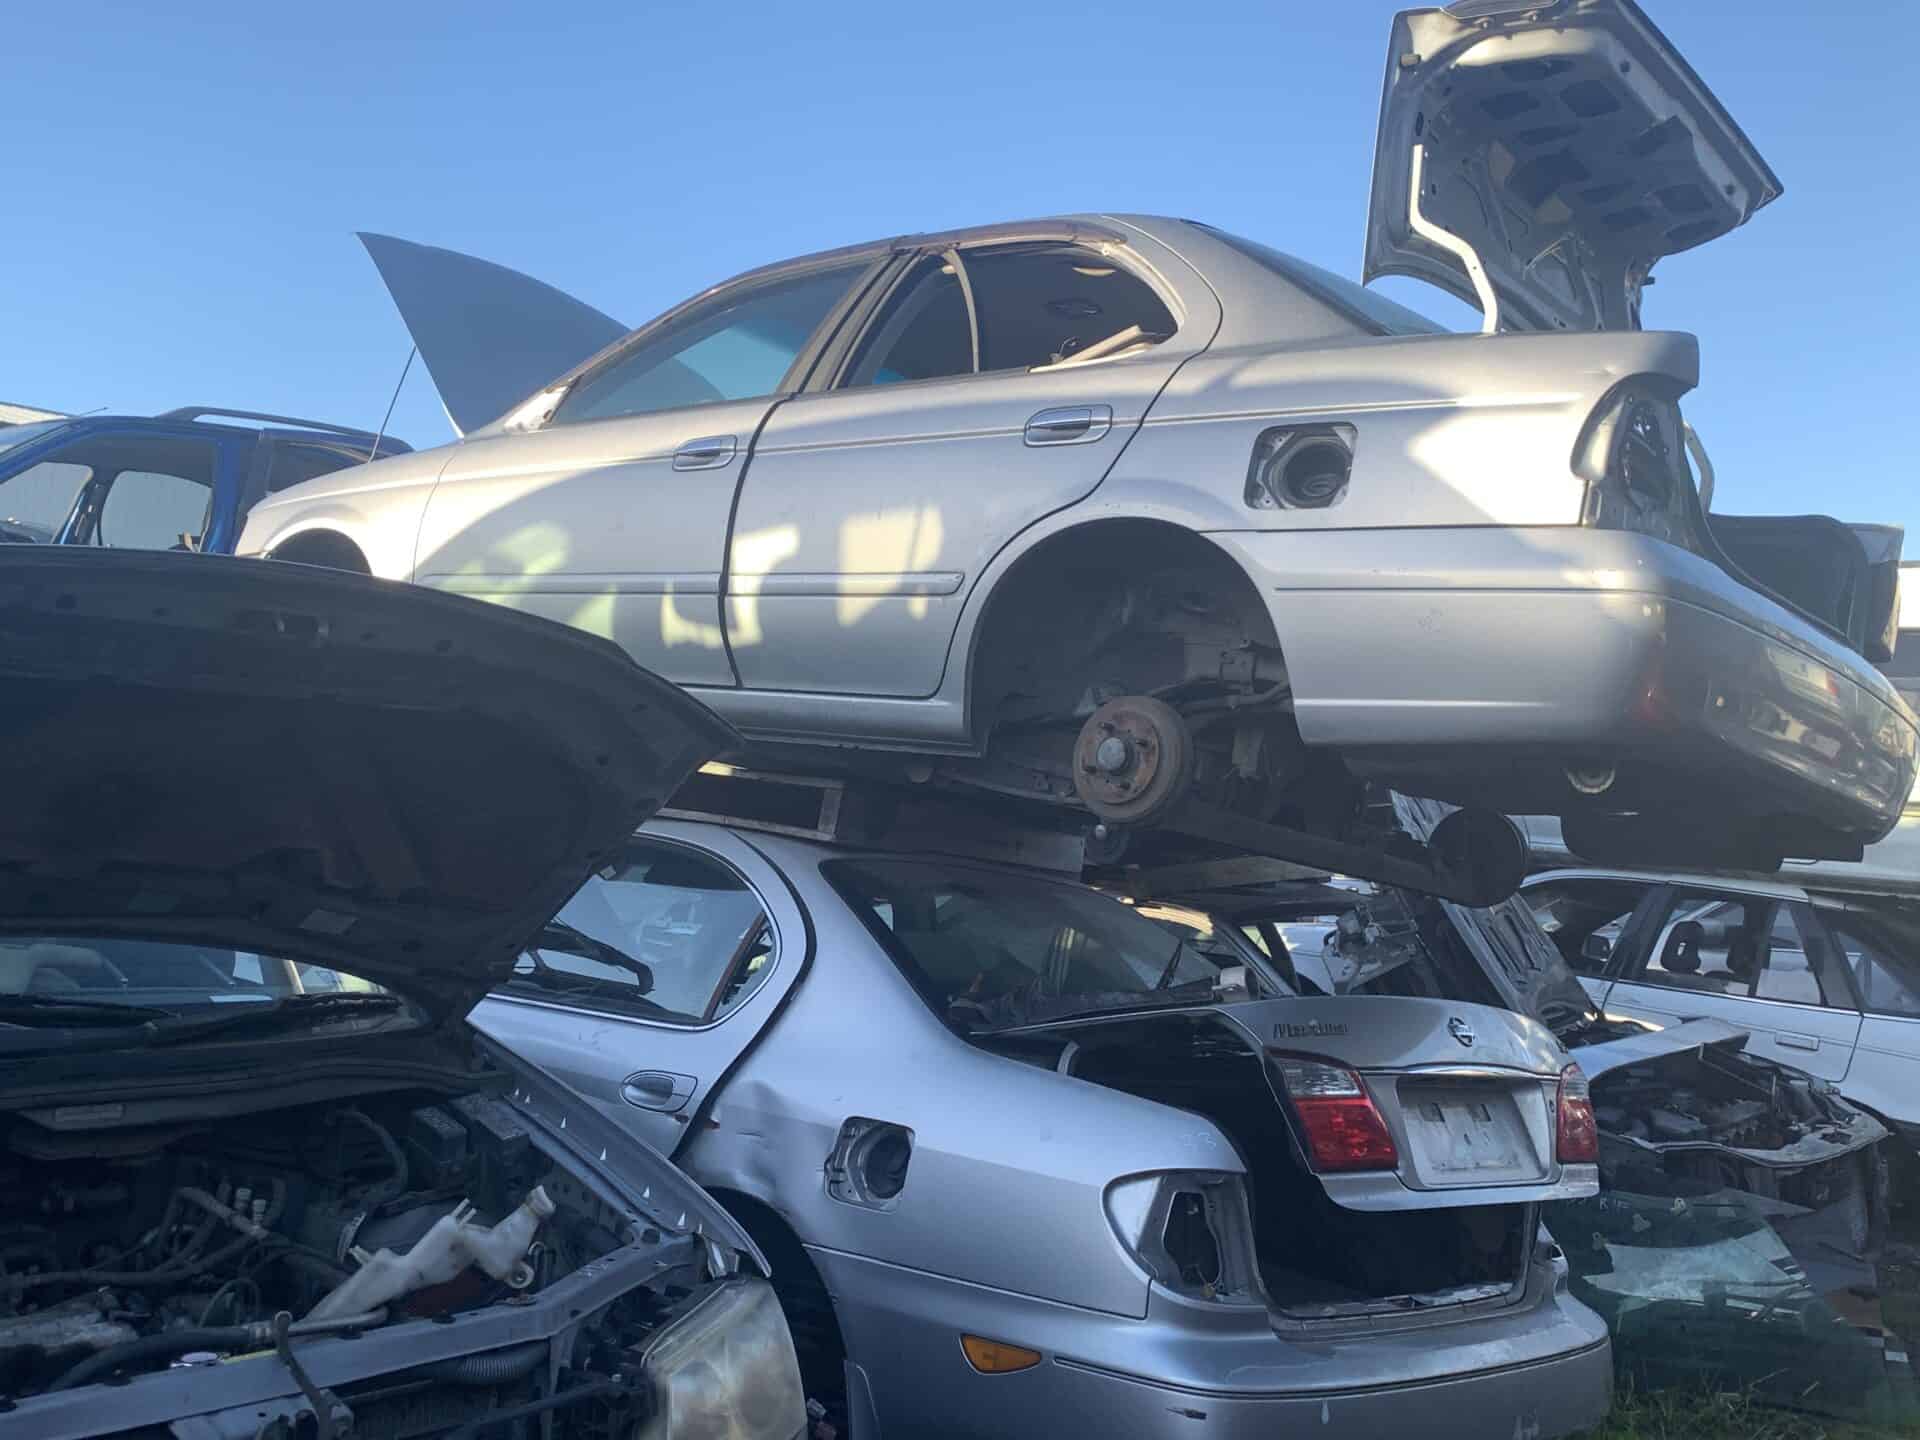 Cash For Cars Henderson: Sell Unwanted Scrap Vehicles To Us